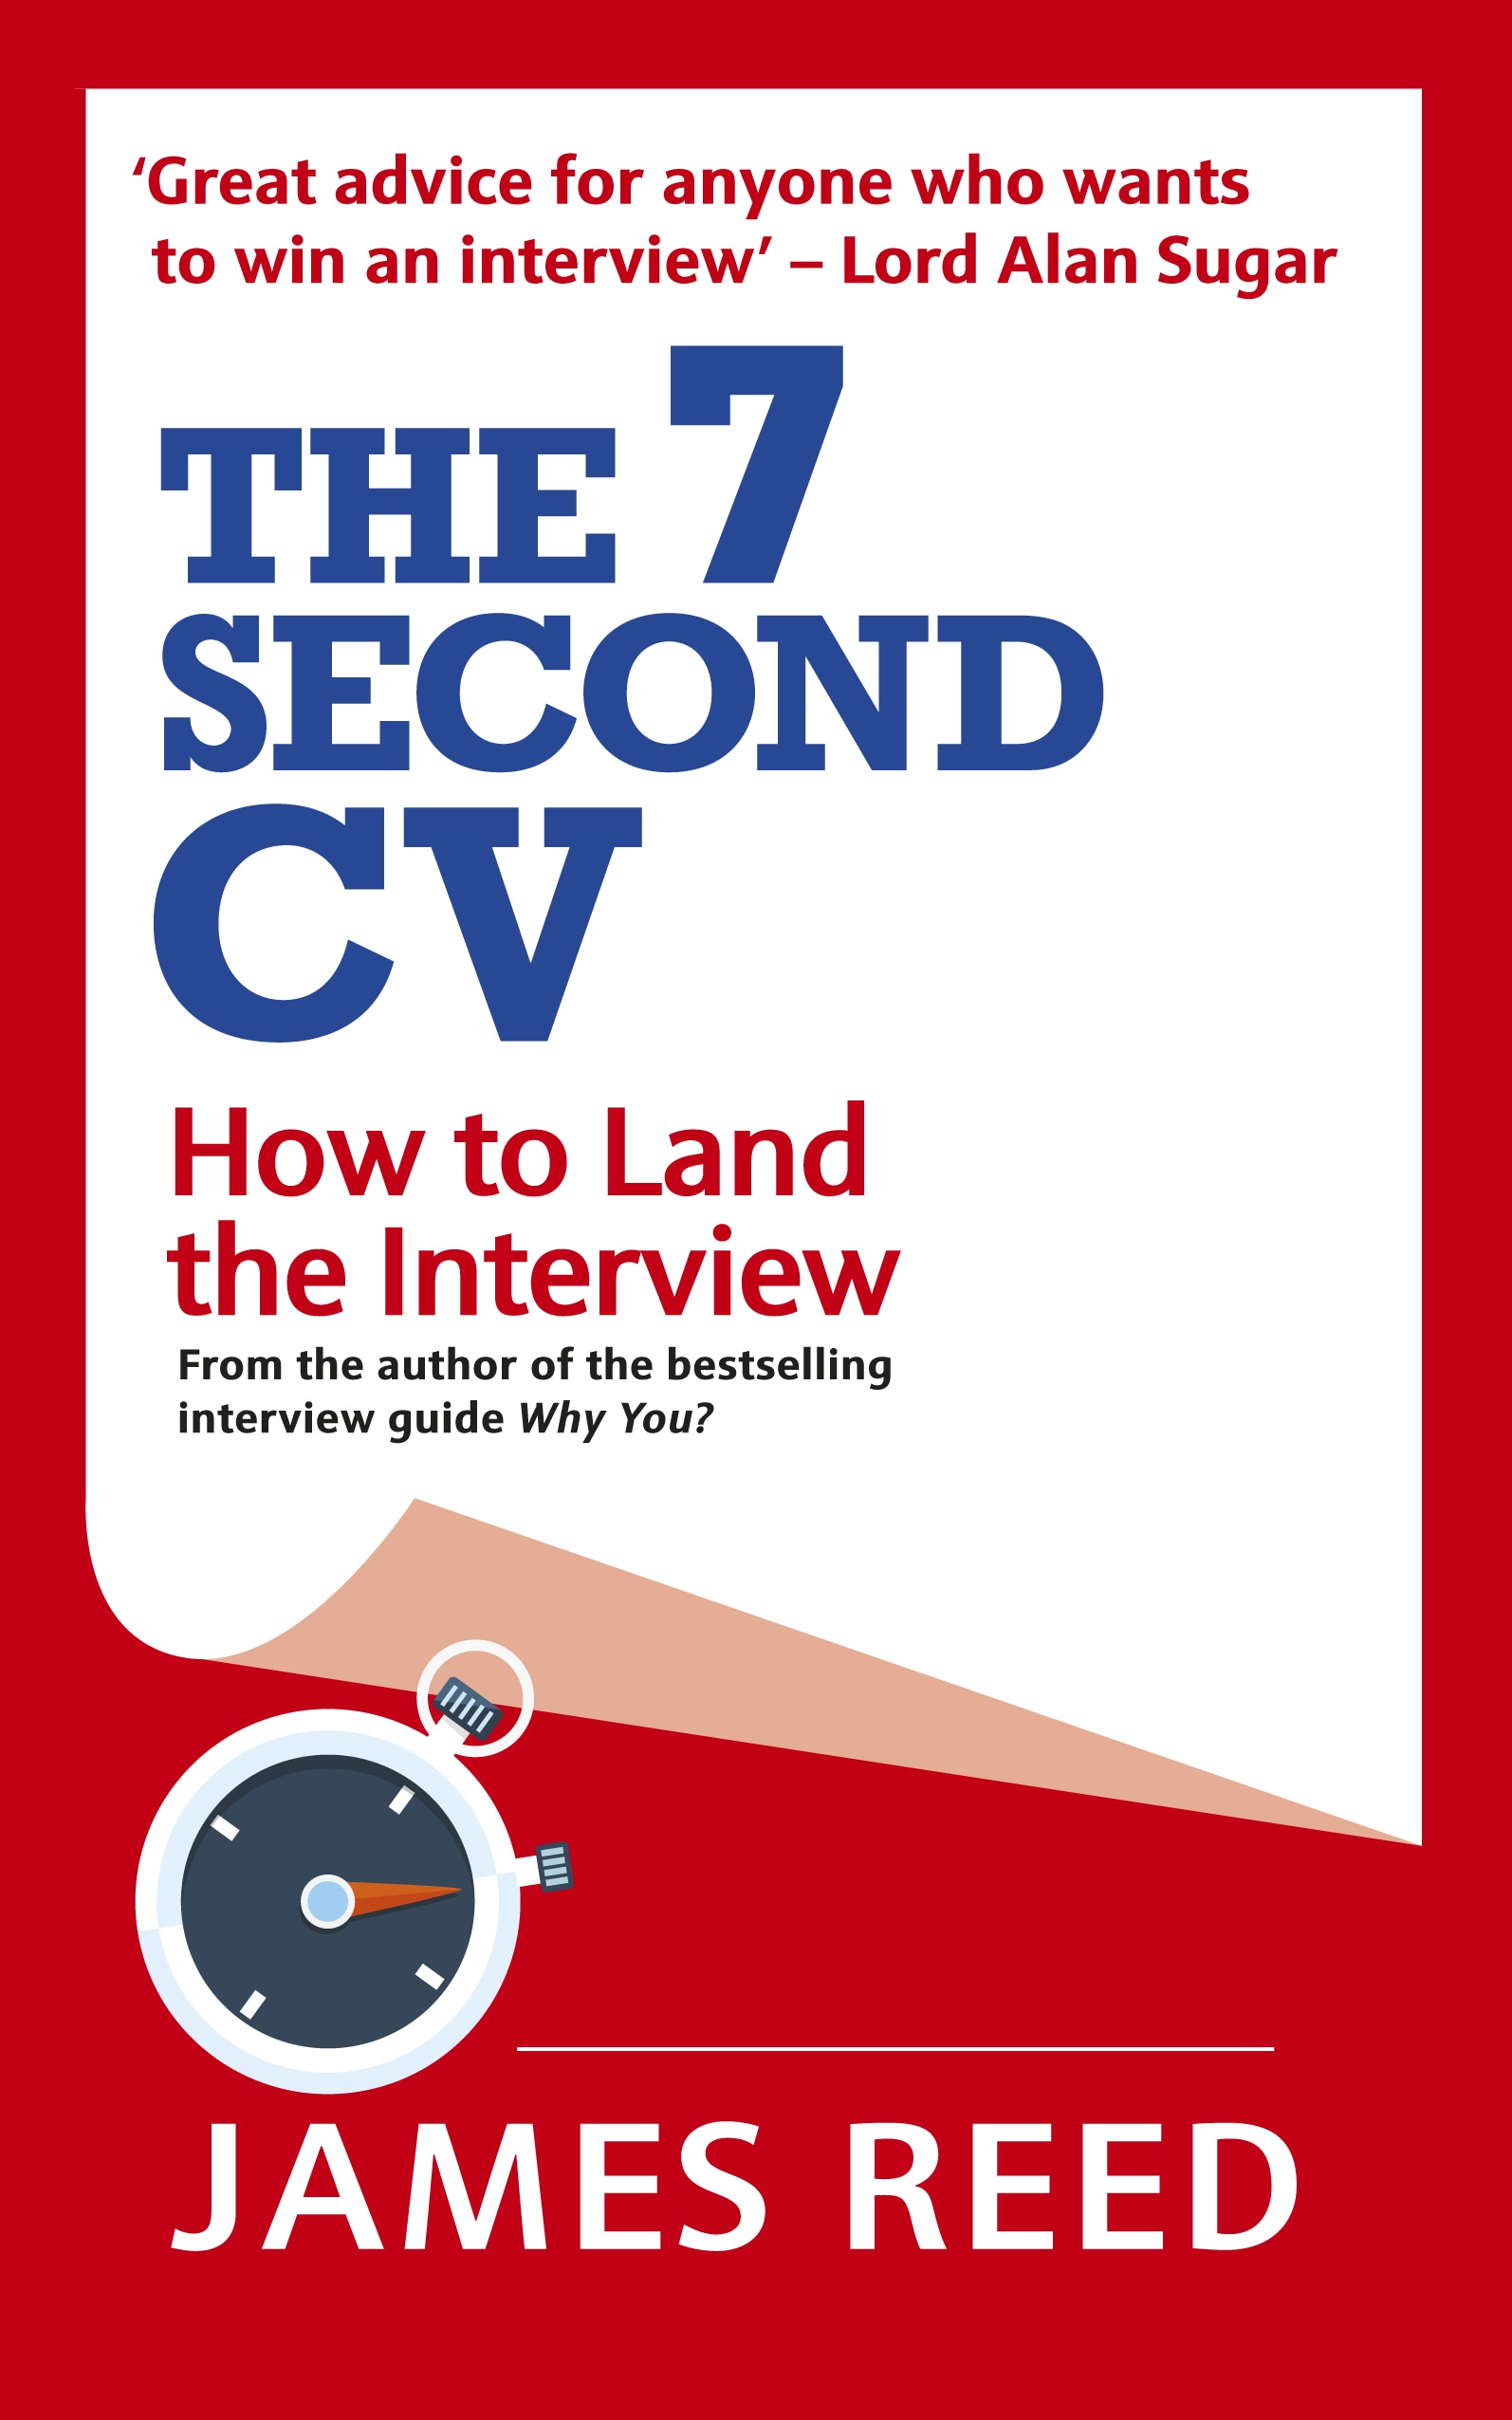 Book “The 7 Second CV” by James Reed — January 3, 2019